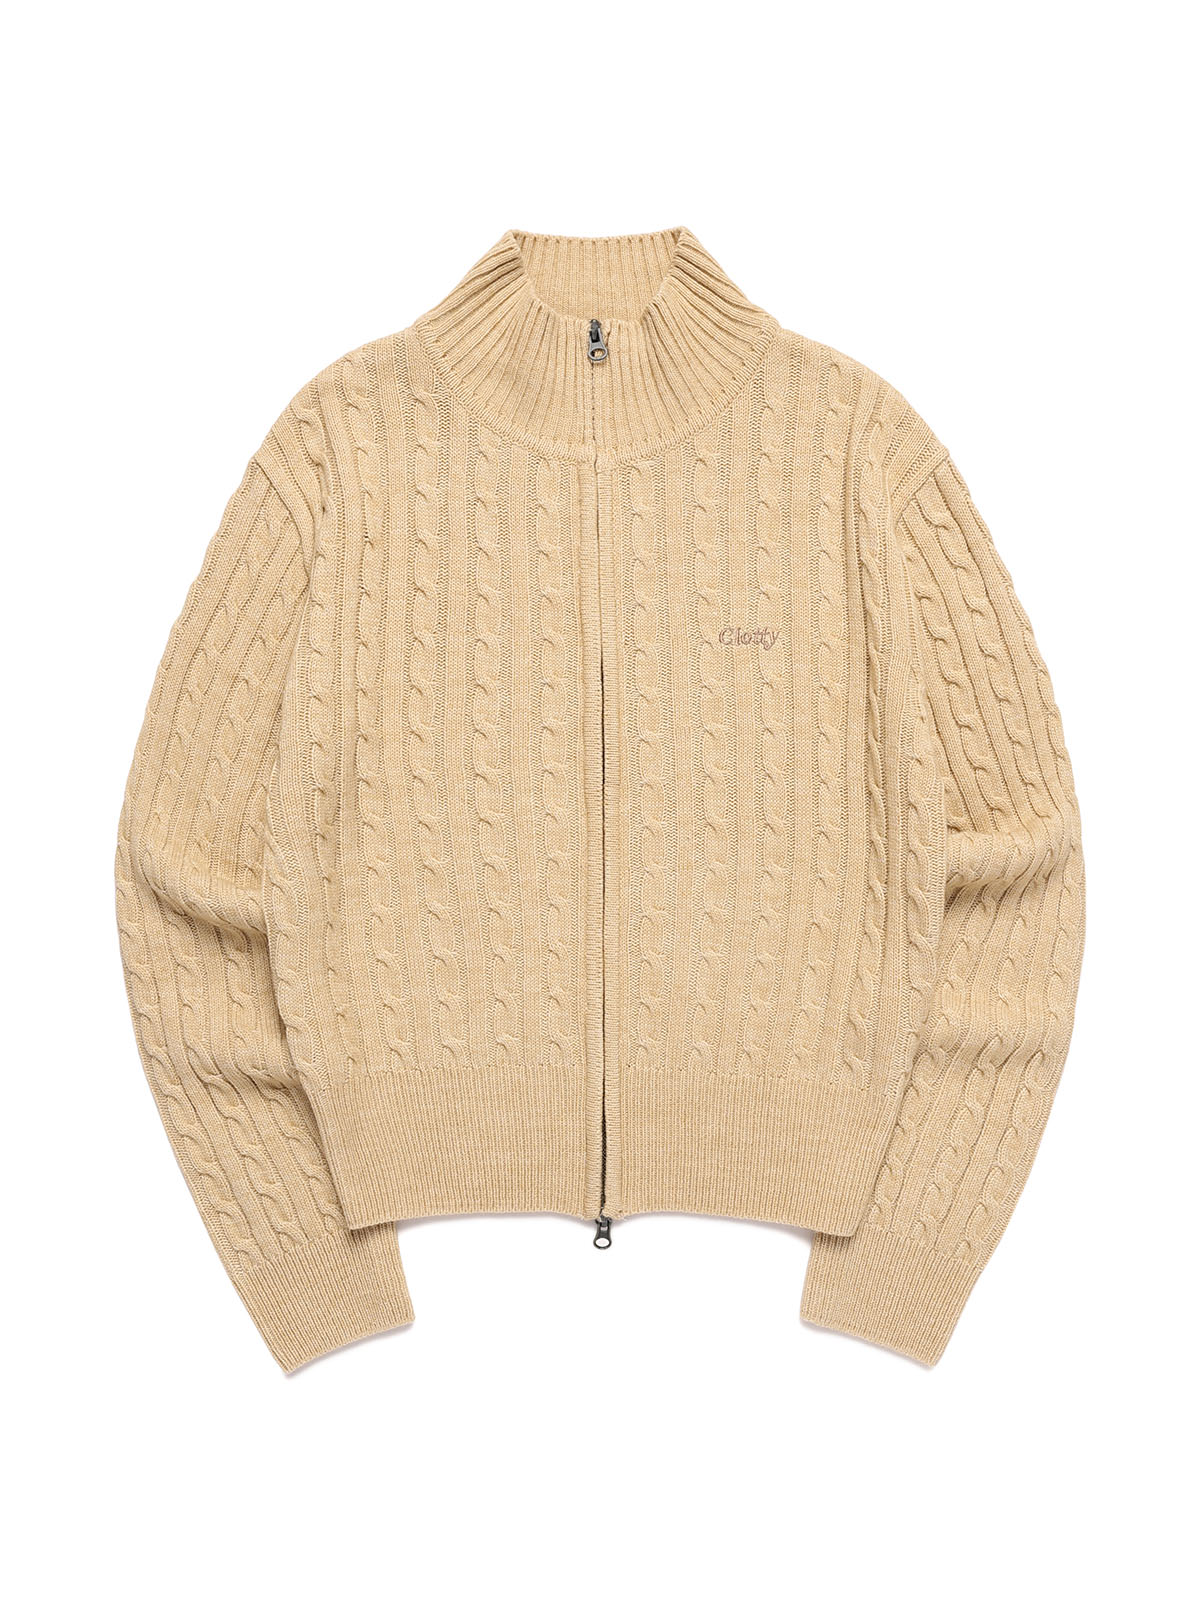 SERIF LOGO CABLE KNIT ZIP-UP[IVORY]